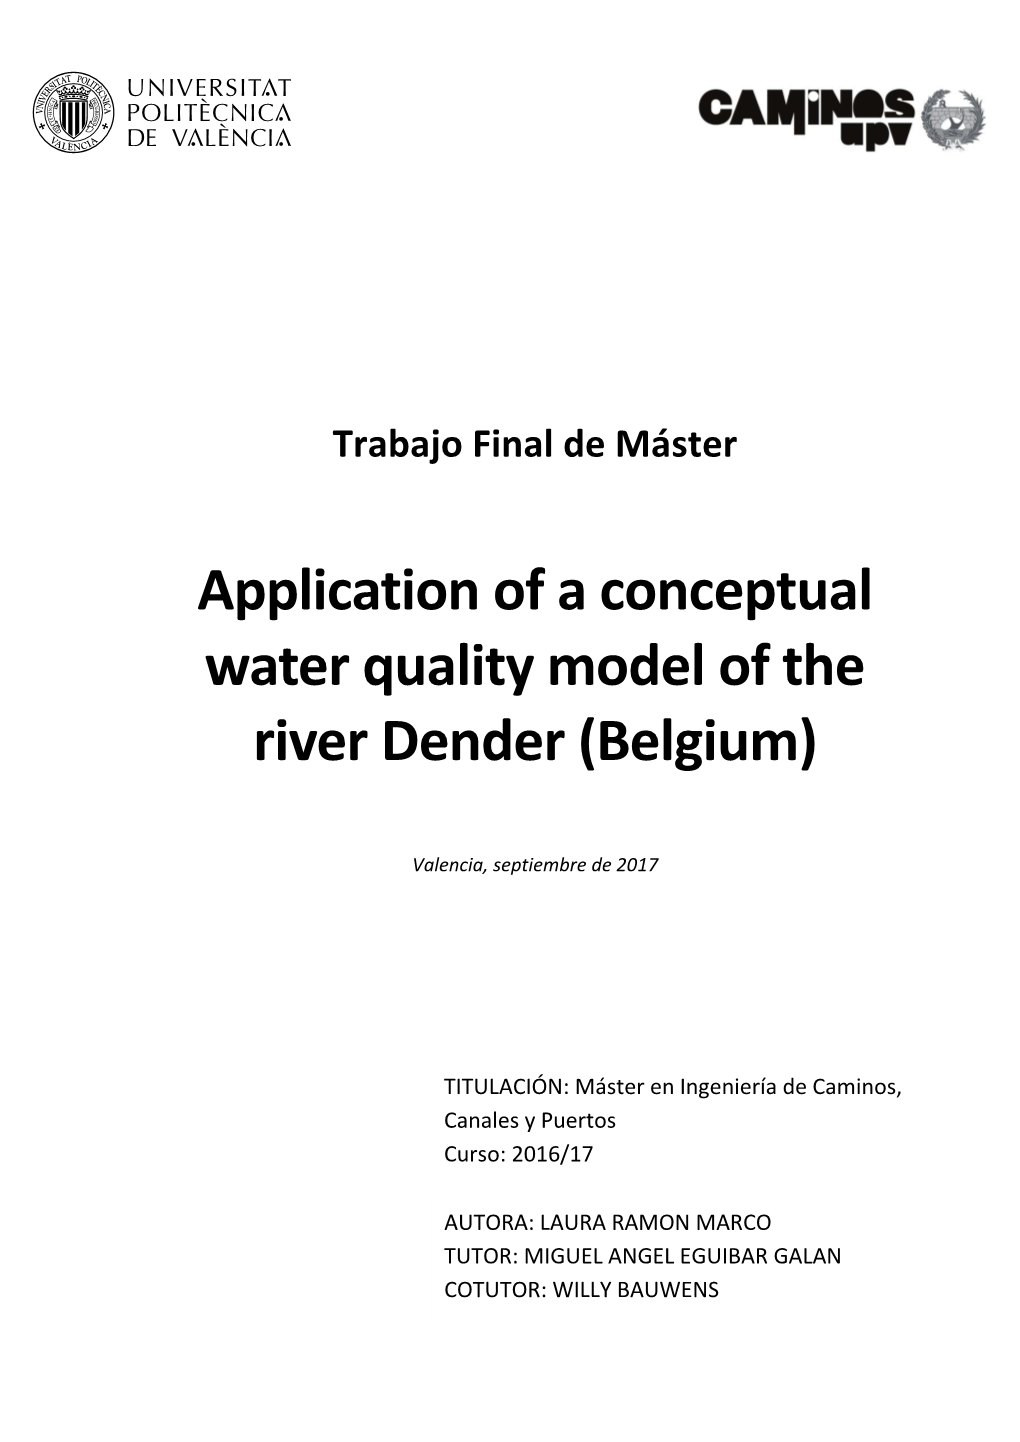 Application of a Conceptual Water Quality Model of the River Dender (Belgium)